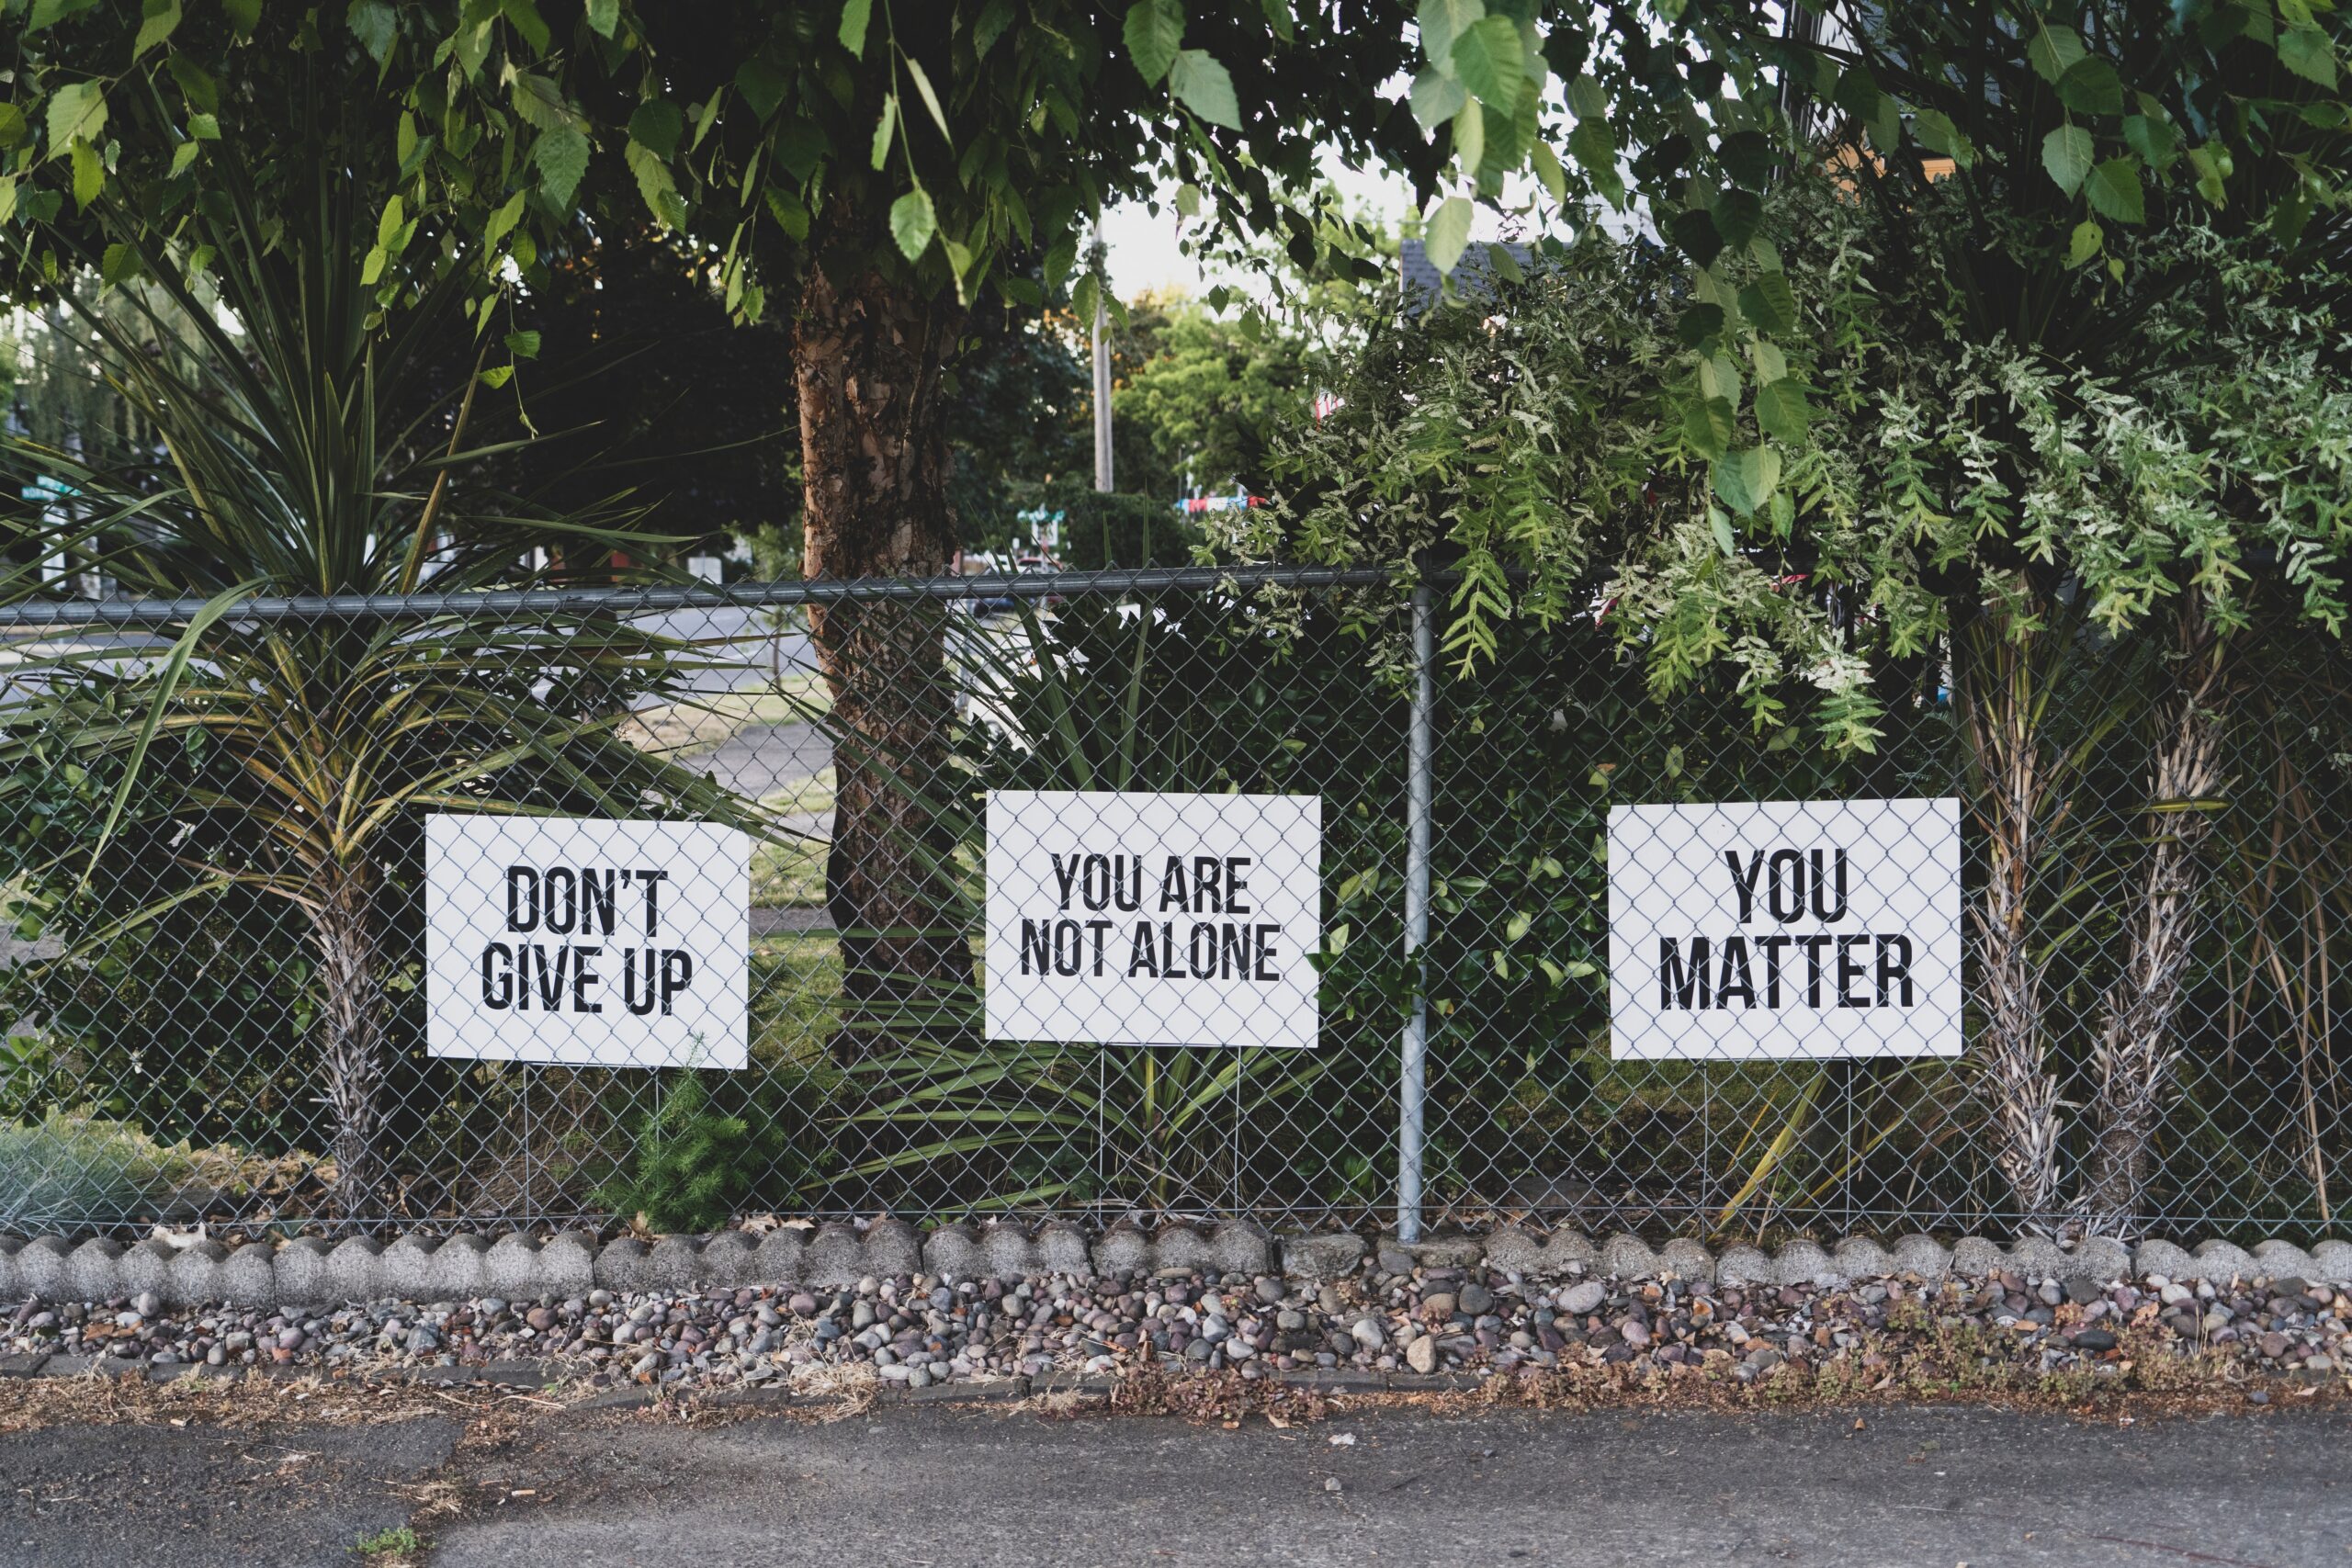 Don't Give Up. You Are Not Alone. You Matter Signage on a Metal Fence in Front of Green Trees.